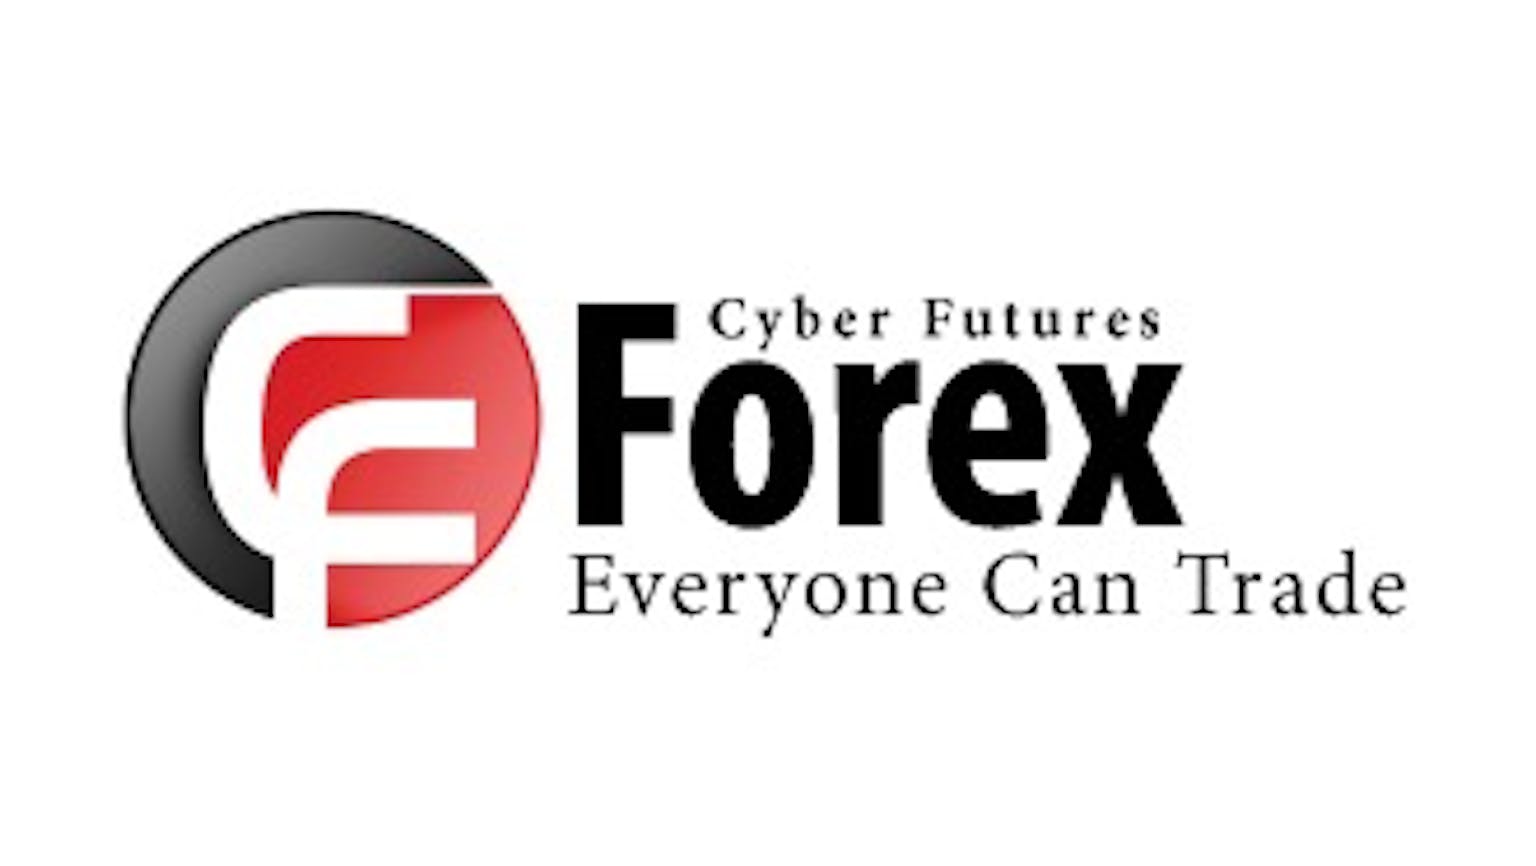 Cyber Futures CF Forex